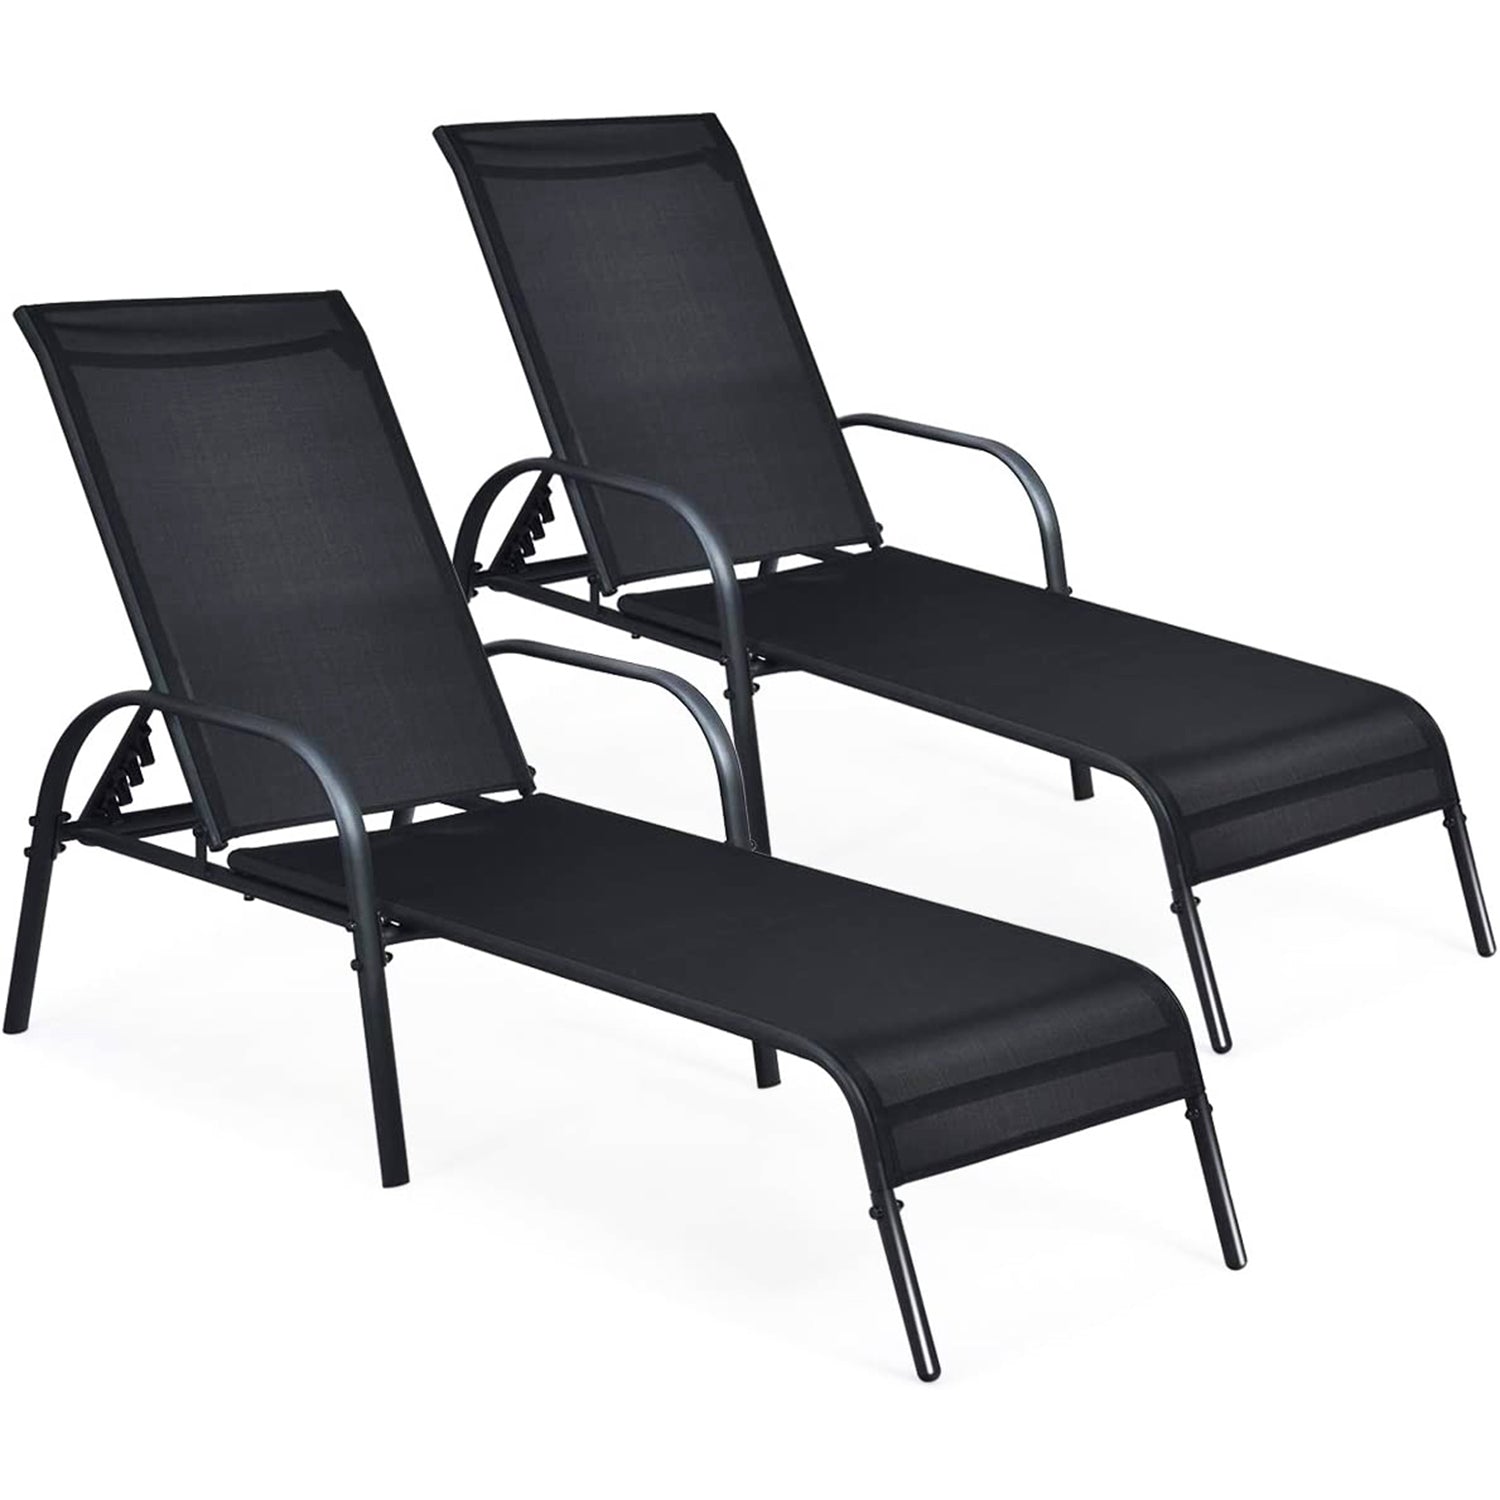 Black Steel Outdoor Chaise Lounge (2-Pack)